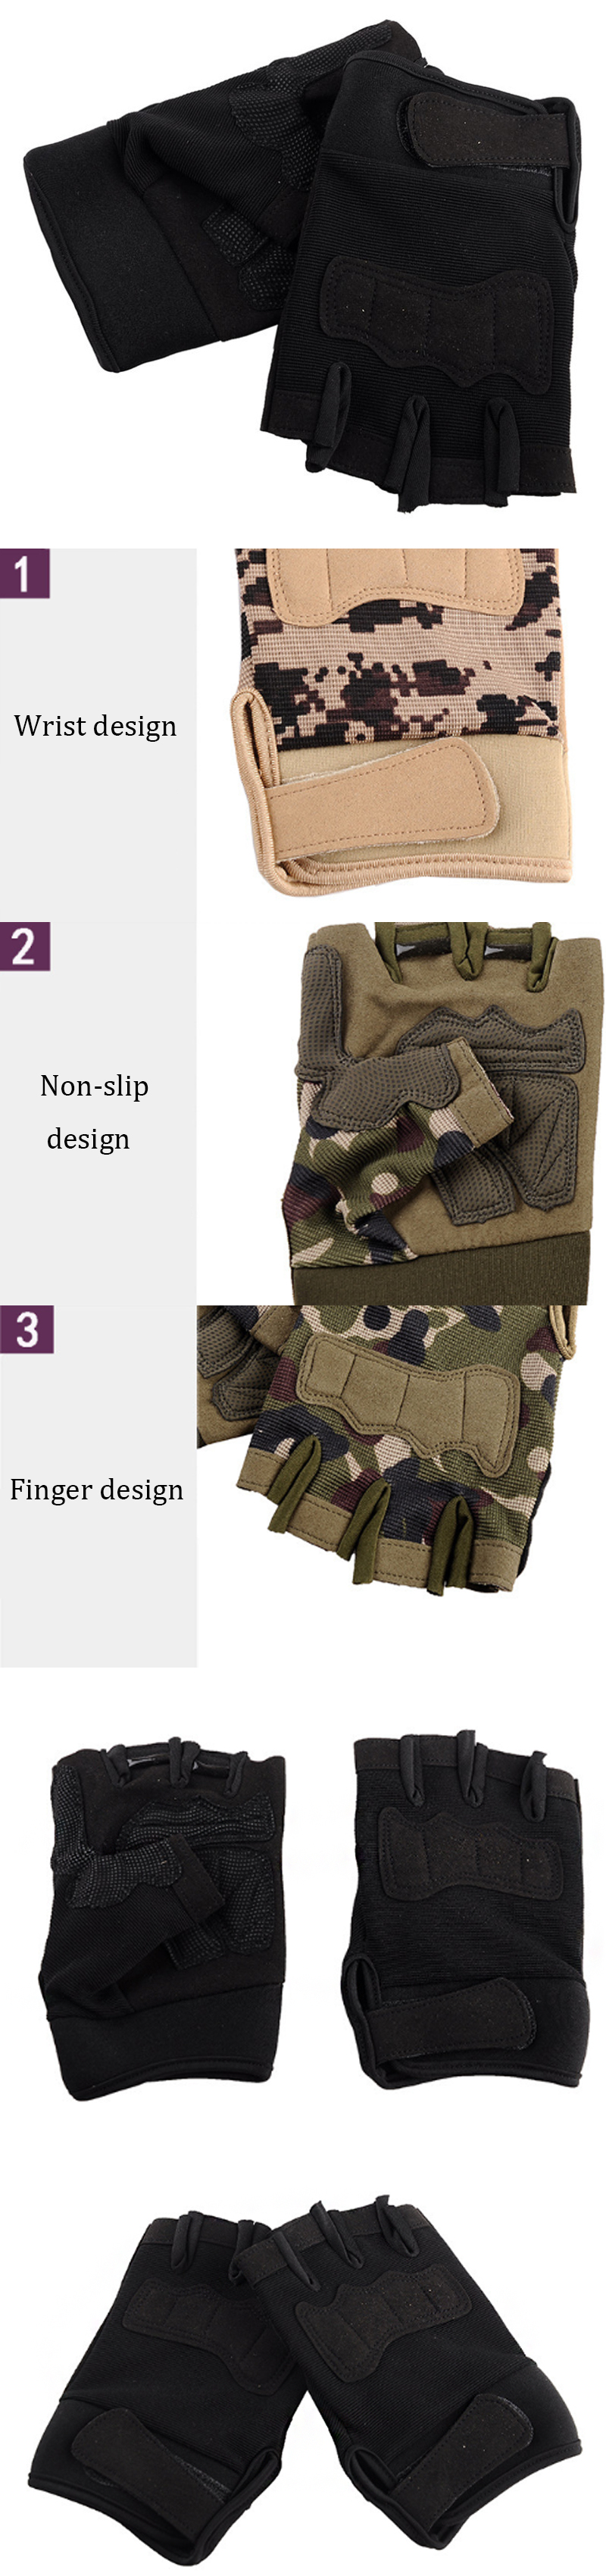 KALOAD-1-Pair-Tactical-Glove-Military-Sports-Climbing-Cycling-Fitness-Anti-skid-Gloves-Half-Finger-G-1452696-1